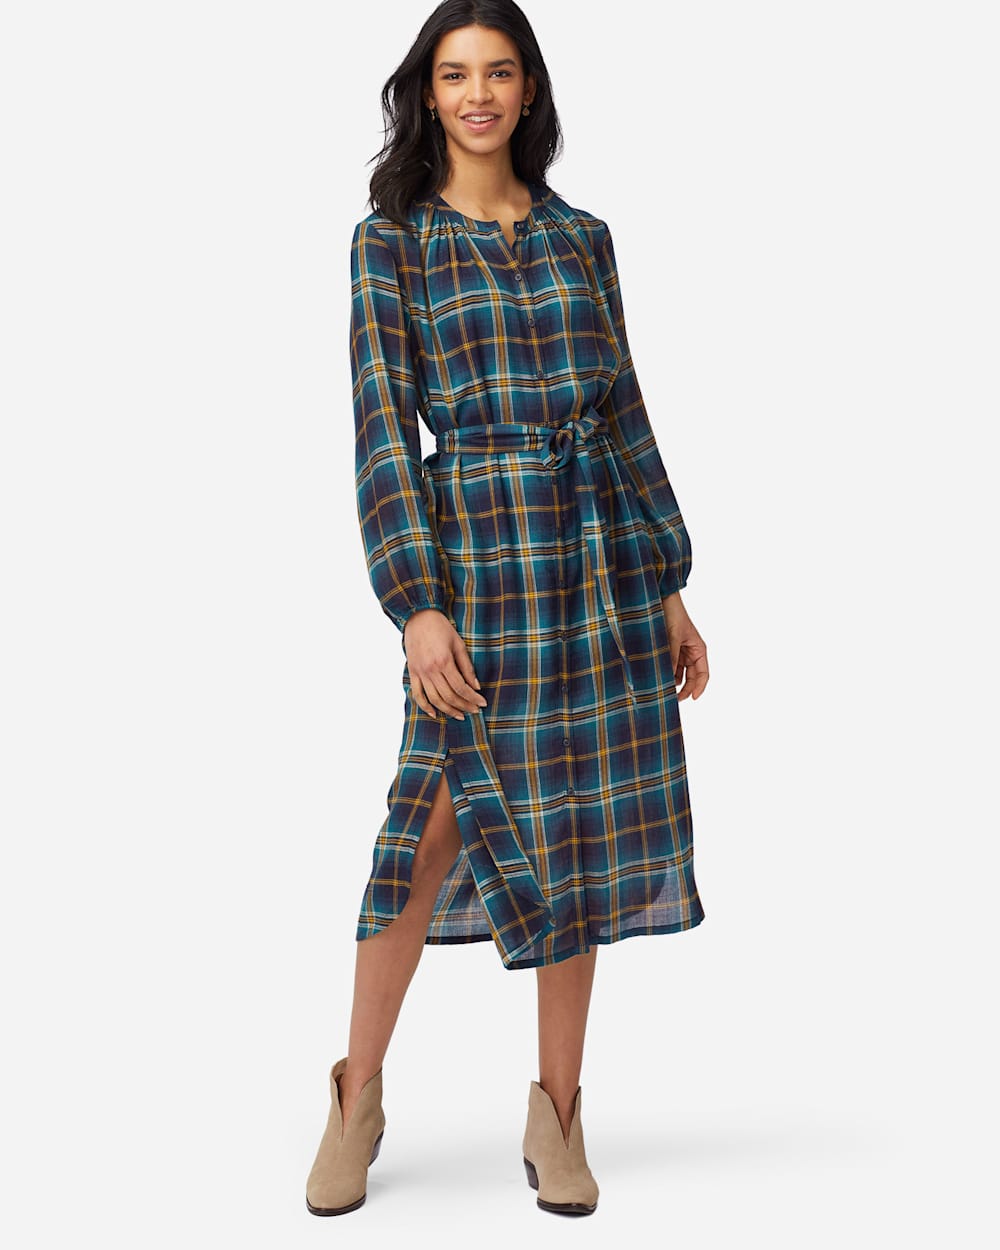 BUTTON-FRONT PLAID DRESS IN BLUE PLAID image number 1